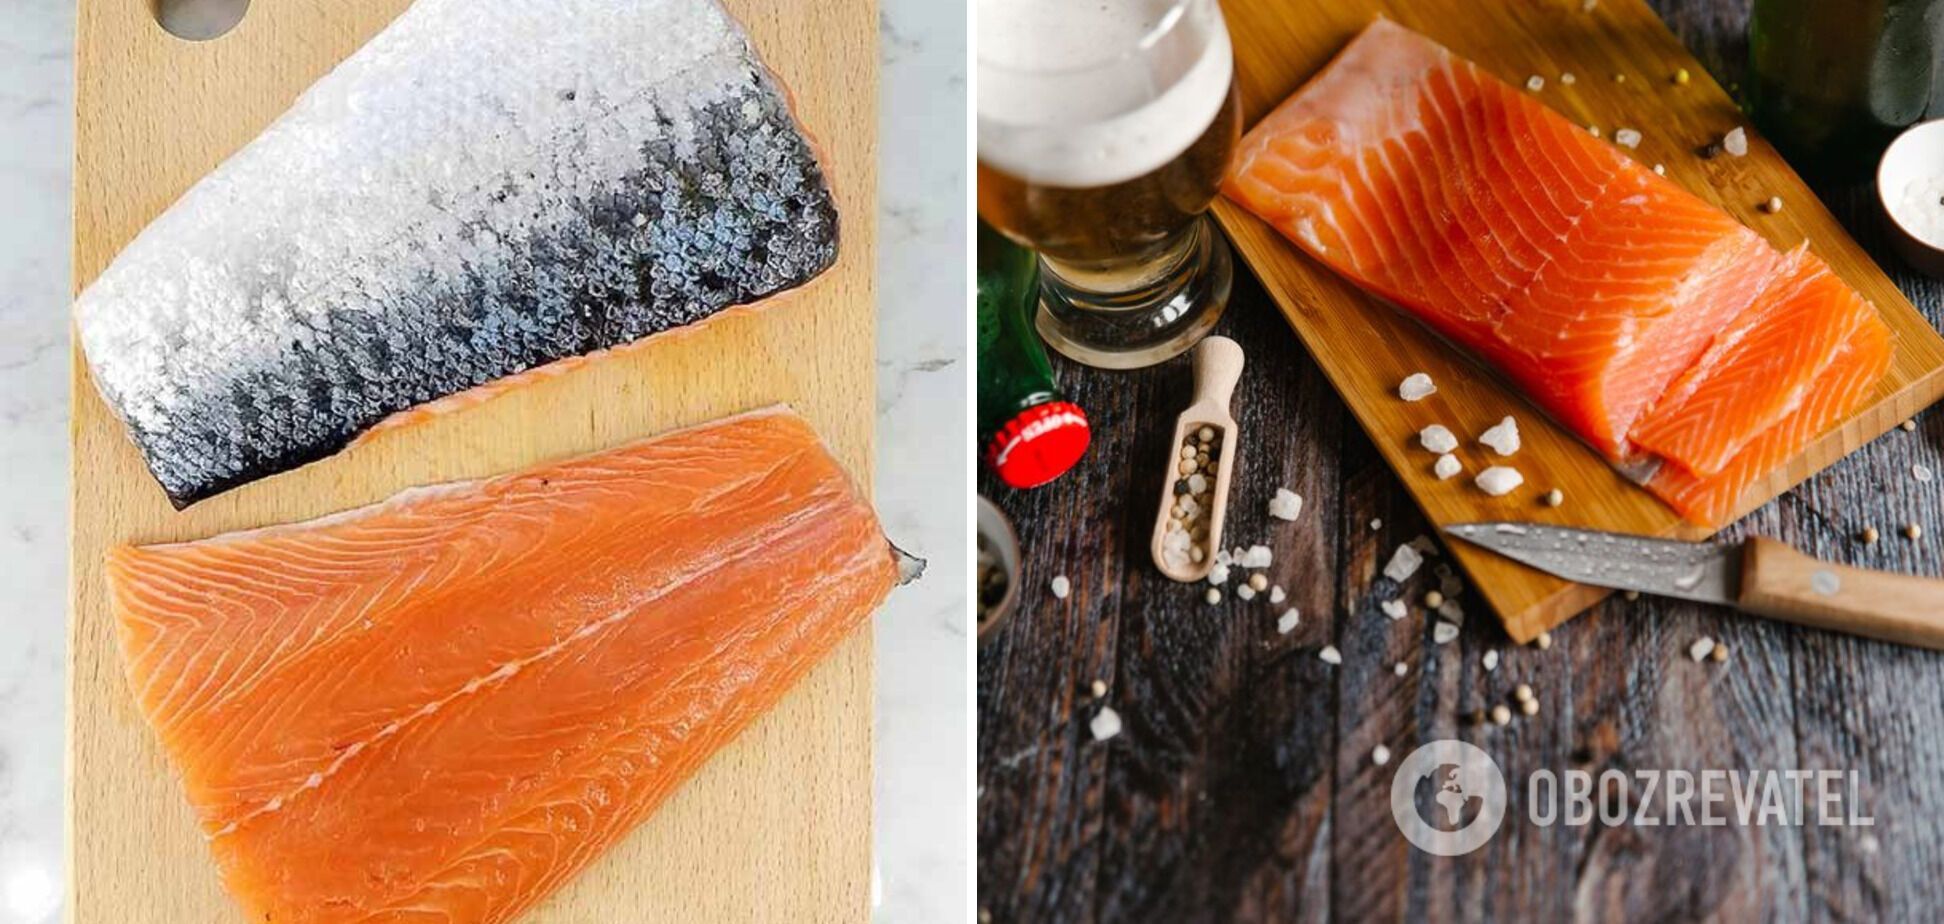 Where to store fish in the refrigerator